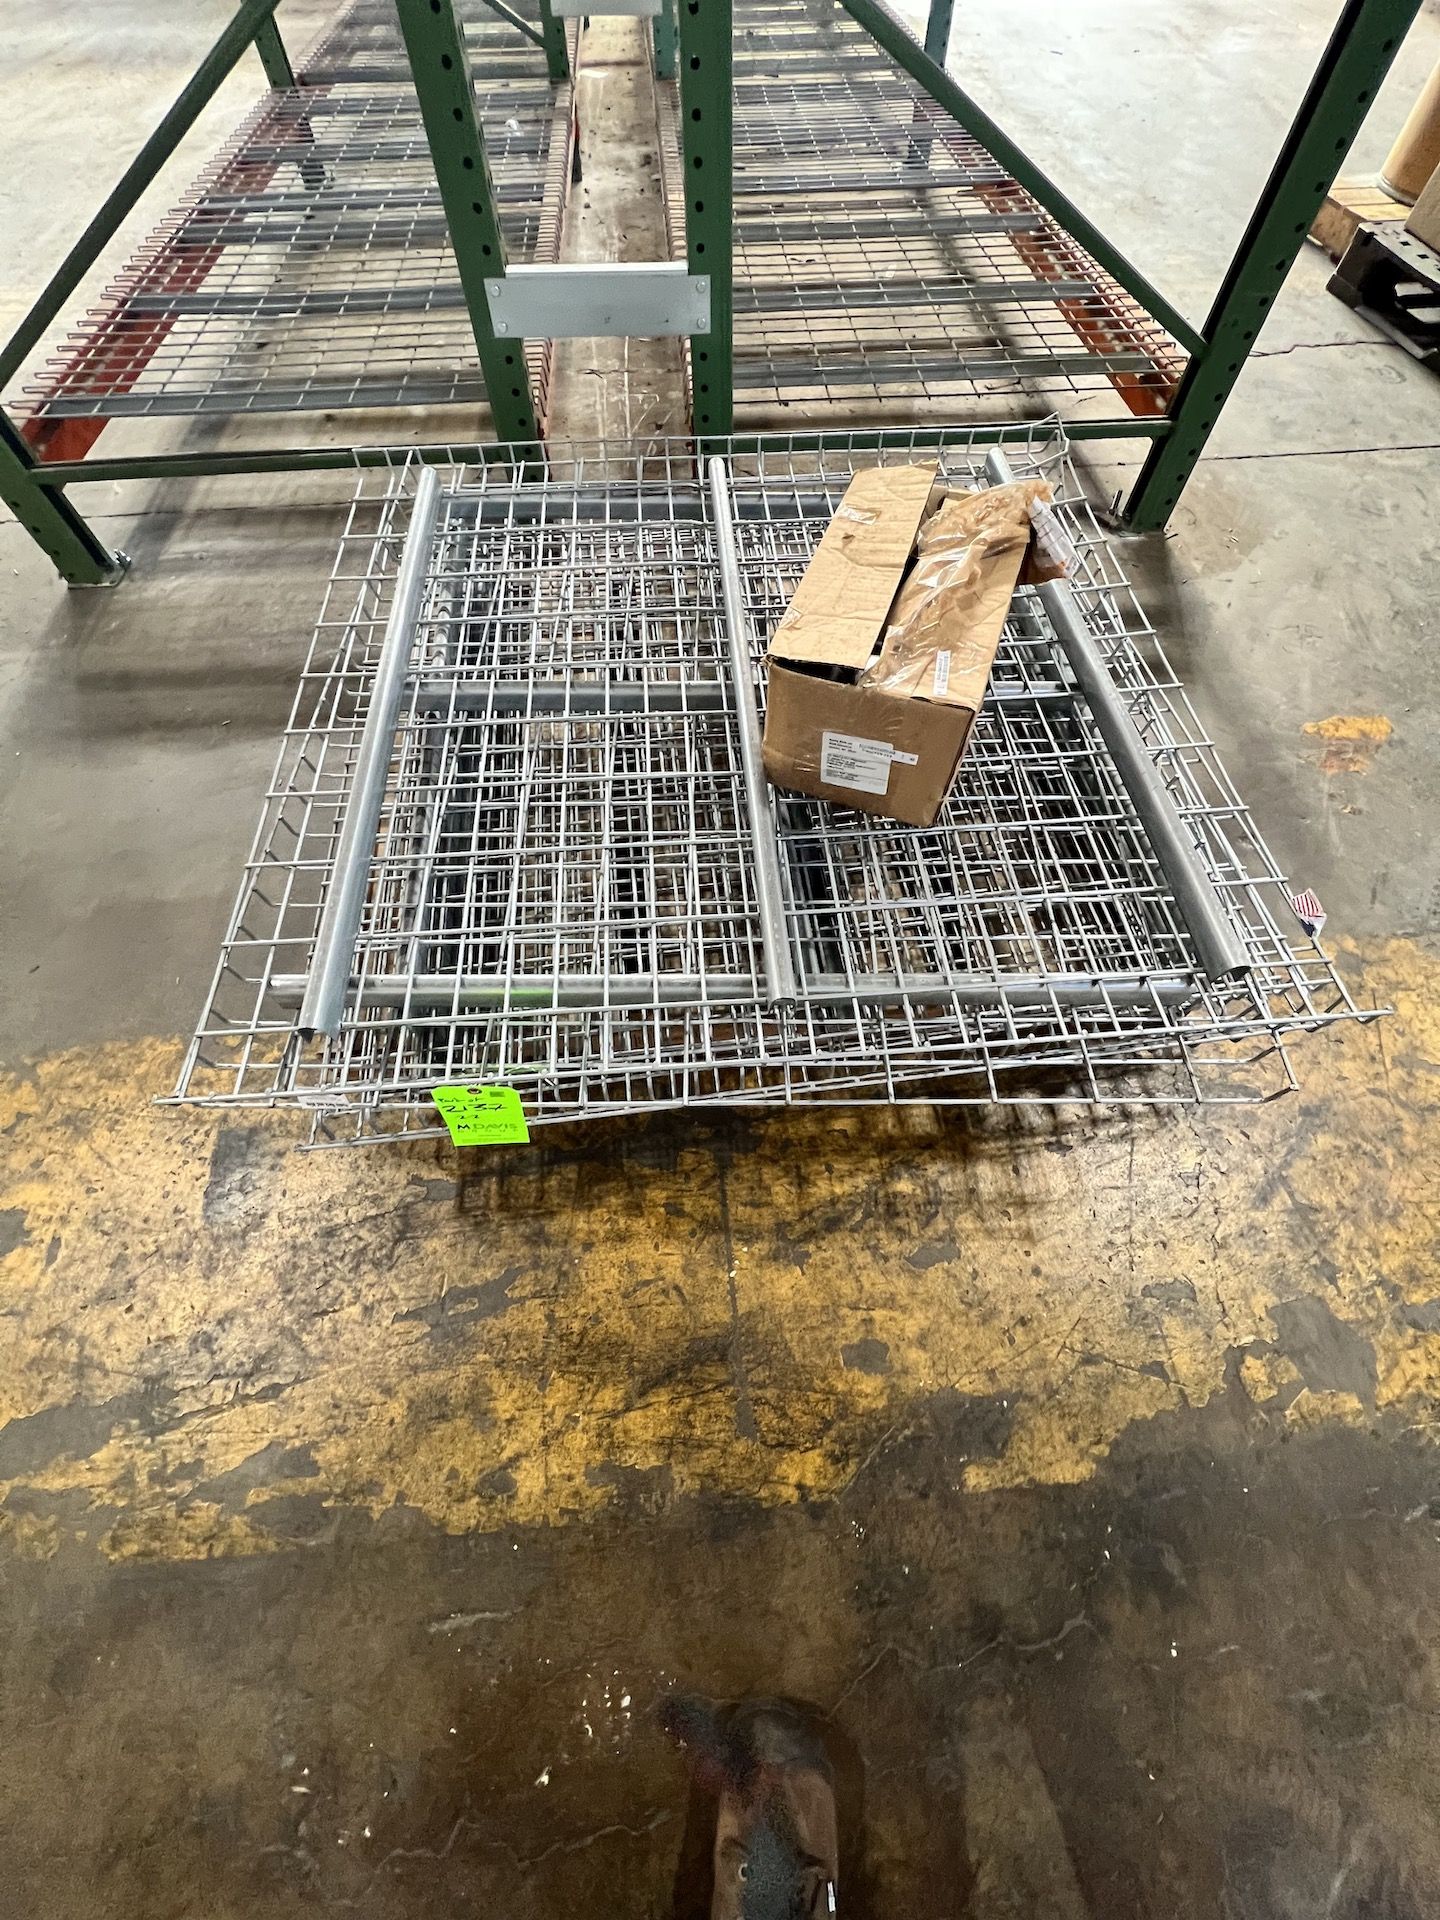 LOT OF NEW PALLET RACKING COMPONENTS, INCLUDES WIRE RACKING - Image 5 of 7